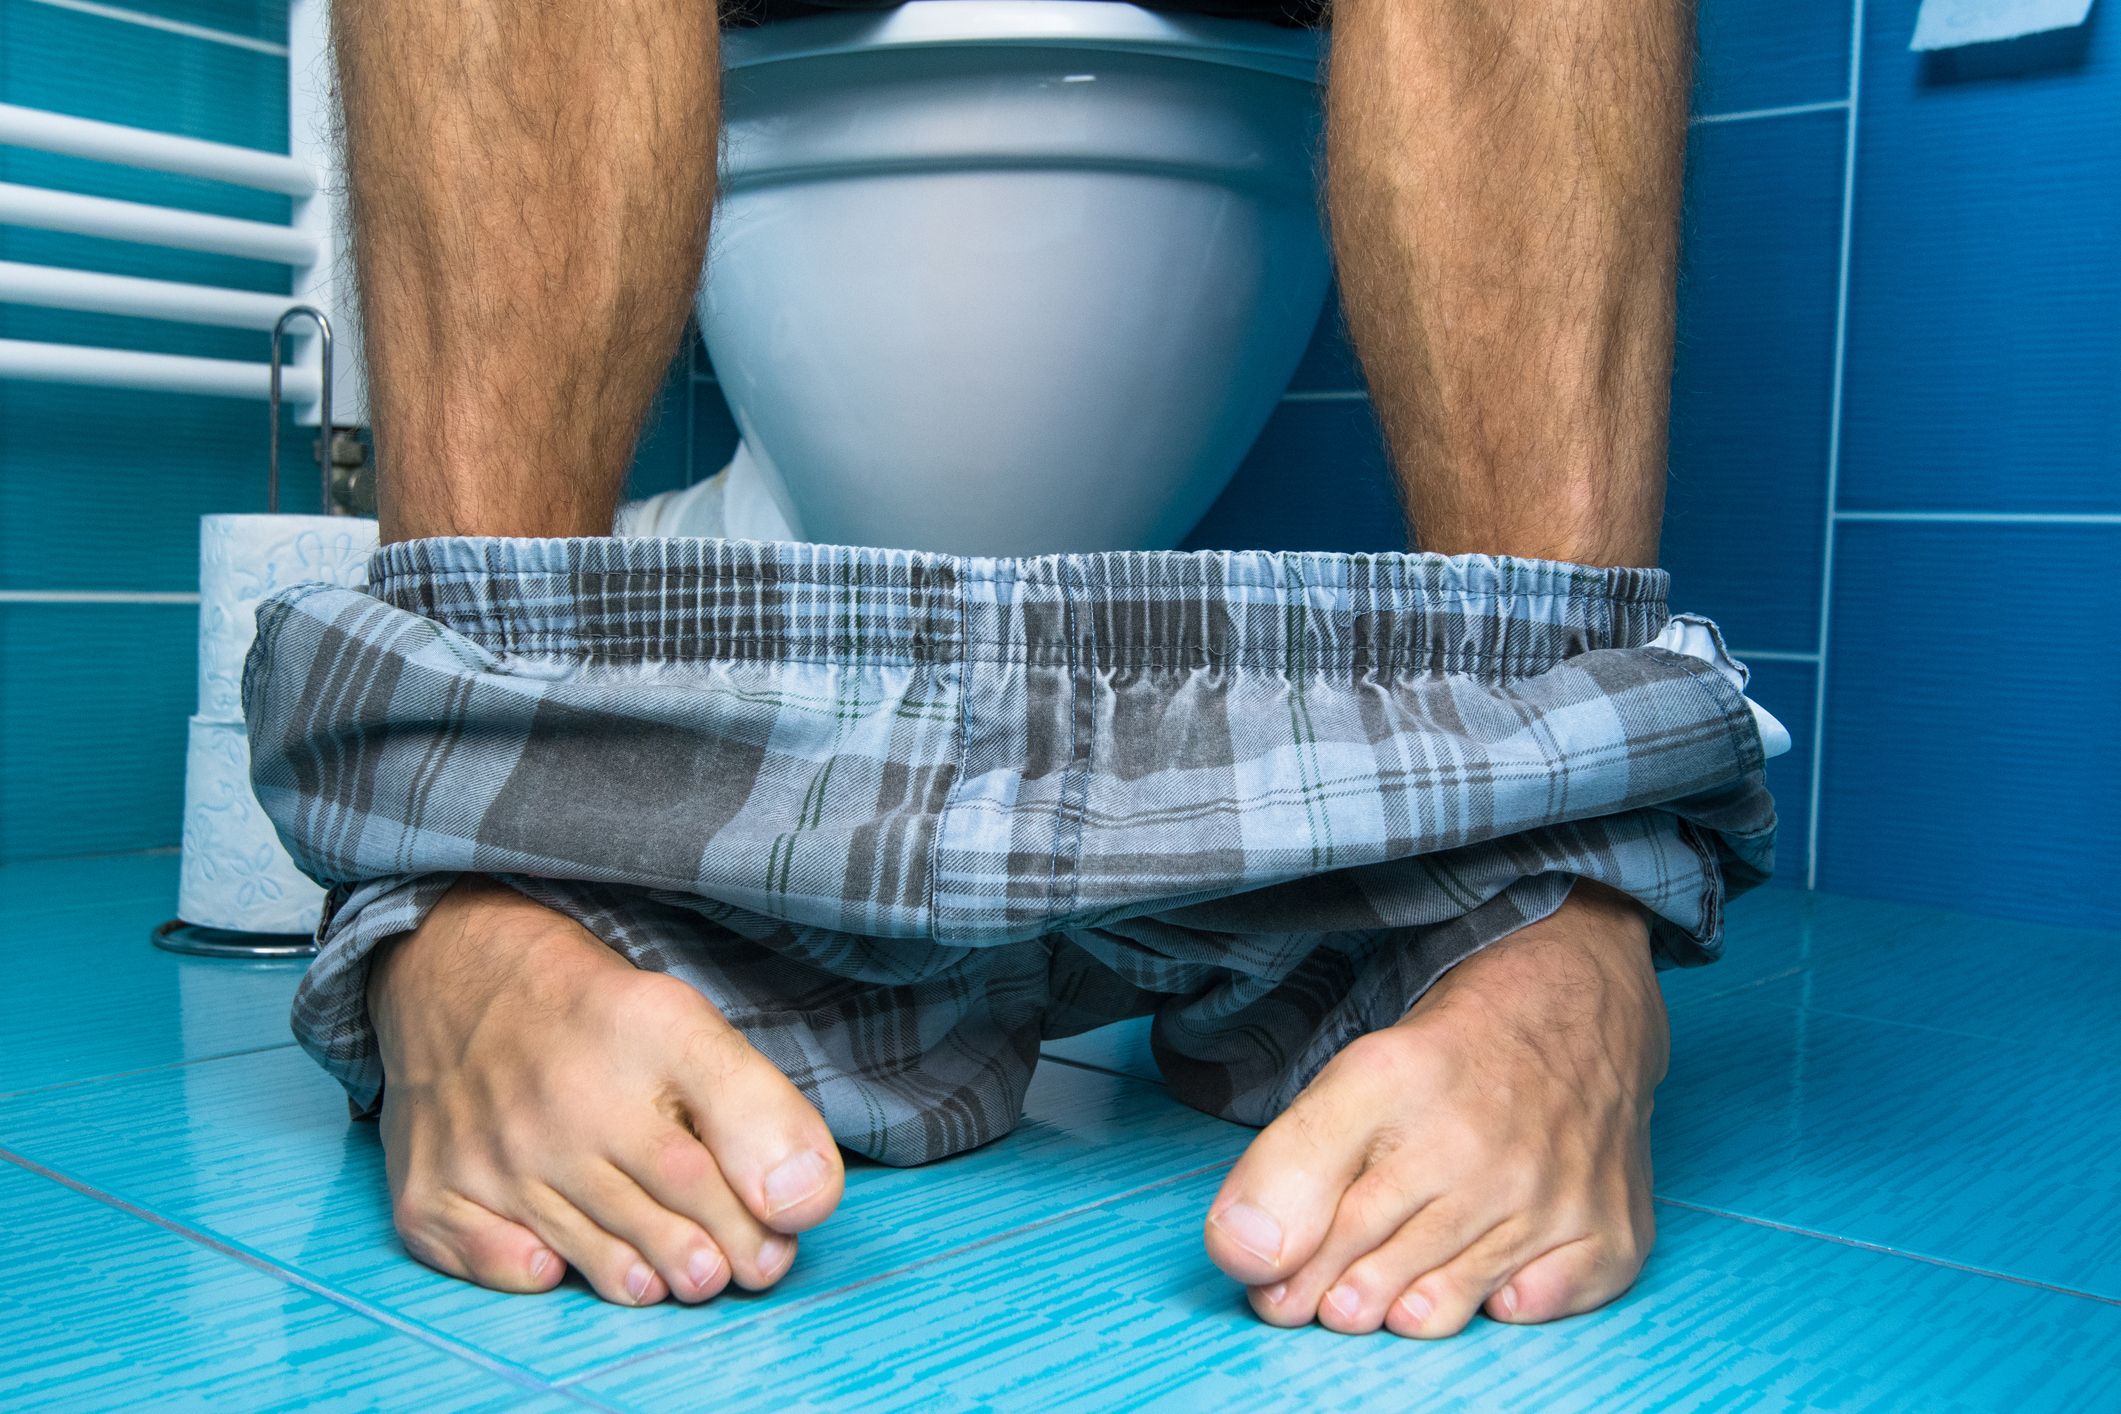 Why Its Perfectly Normal for Men to Pee Sitting Down